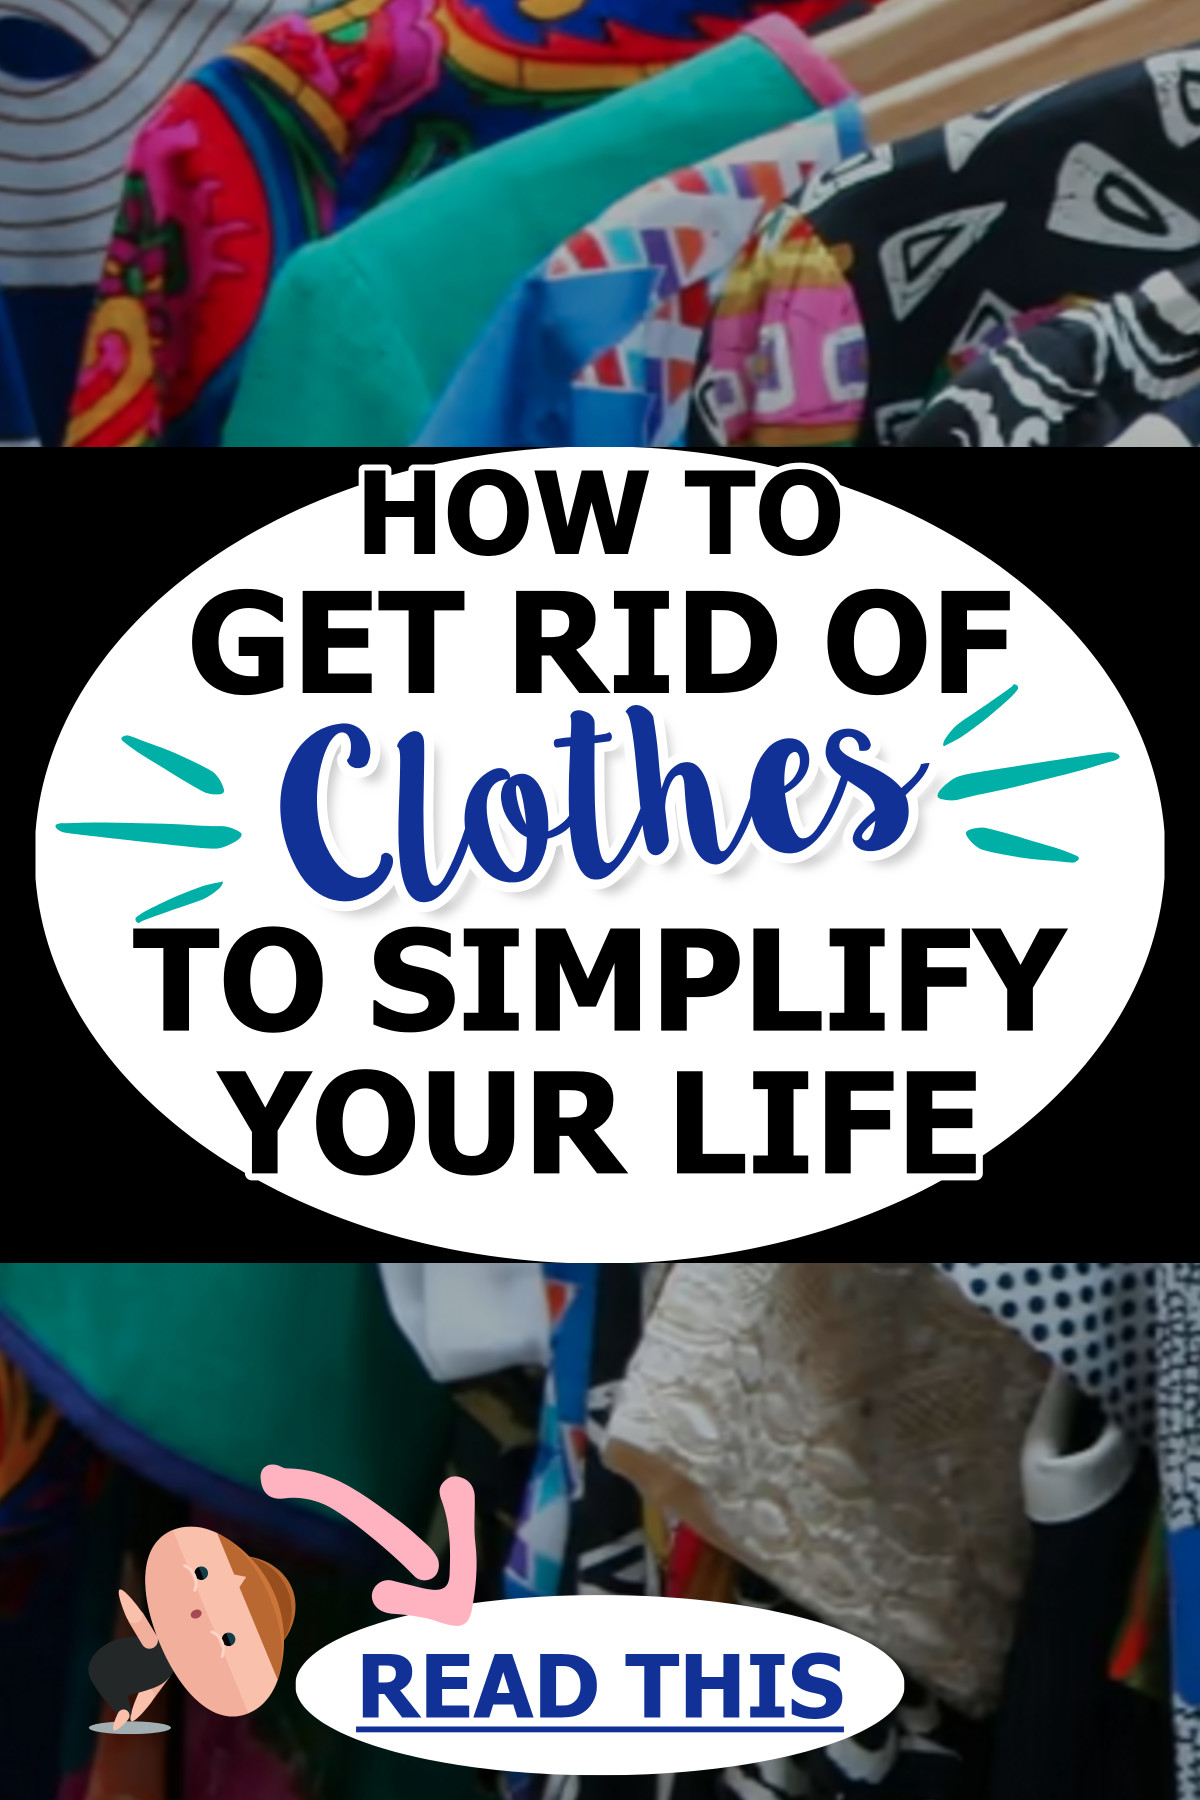 How To Get Rid Of Clothes To Simplify Your Life